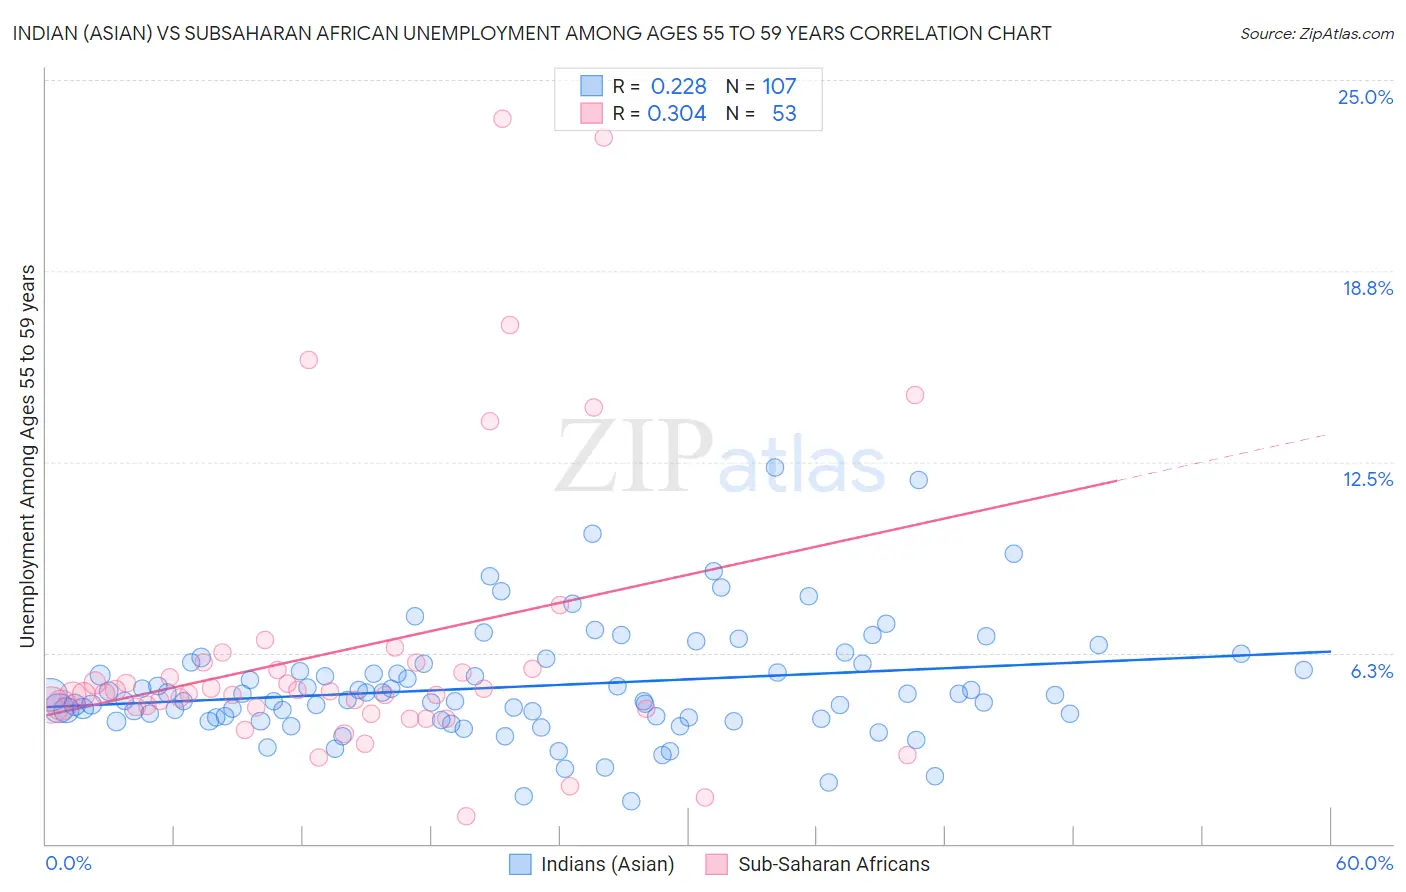 Indian (Asian) vs Subsaharan African Unemployment Among Ages 55 to 59 years